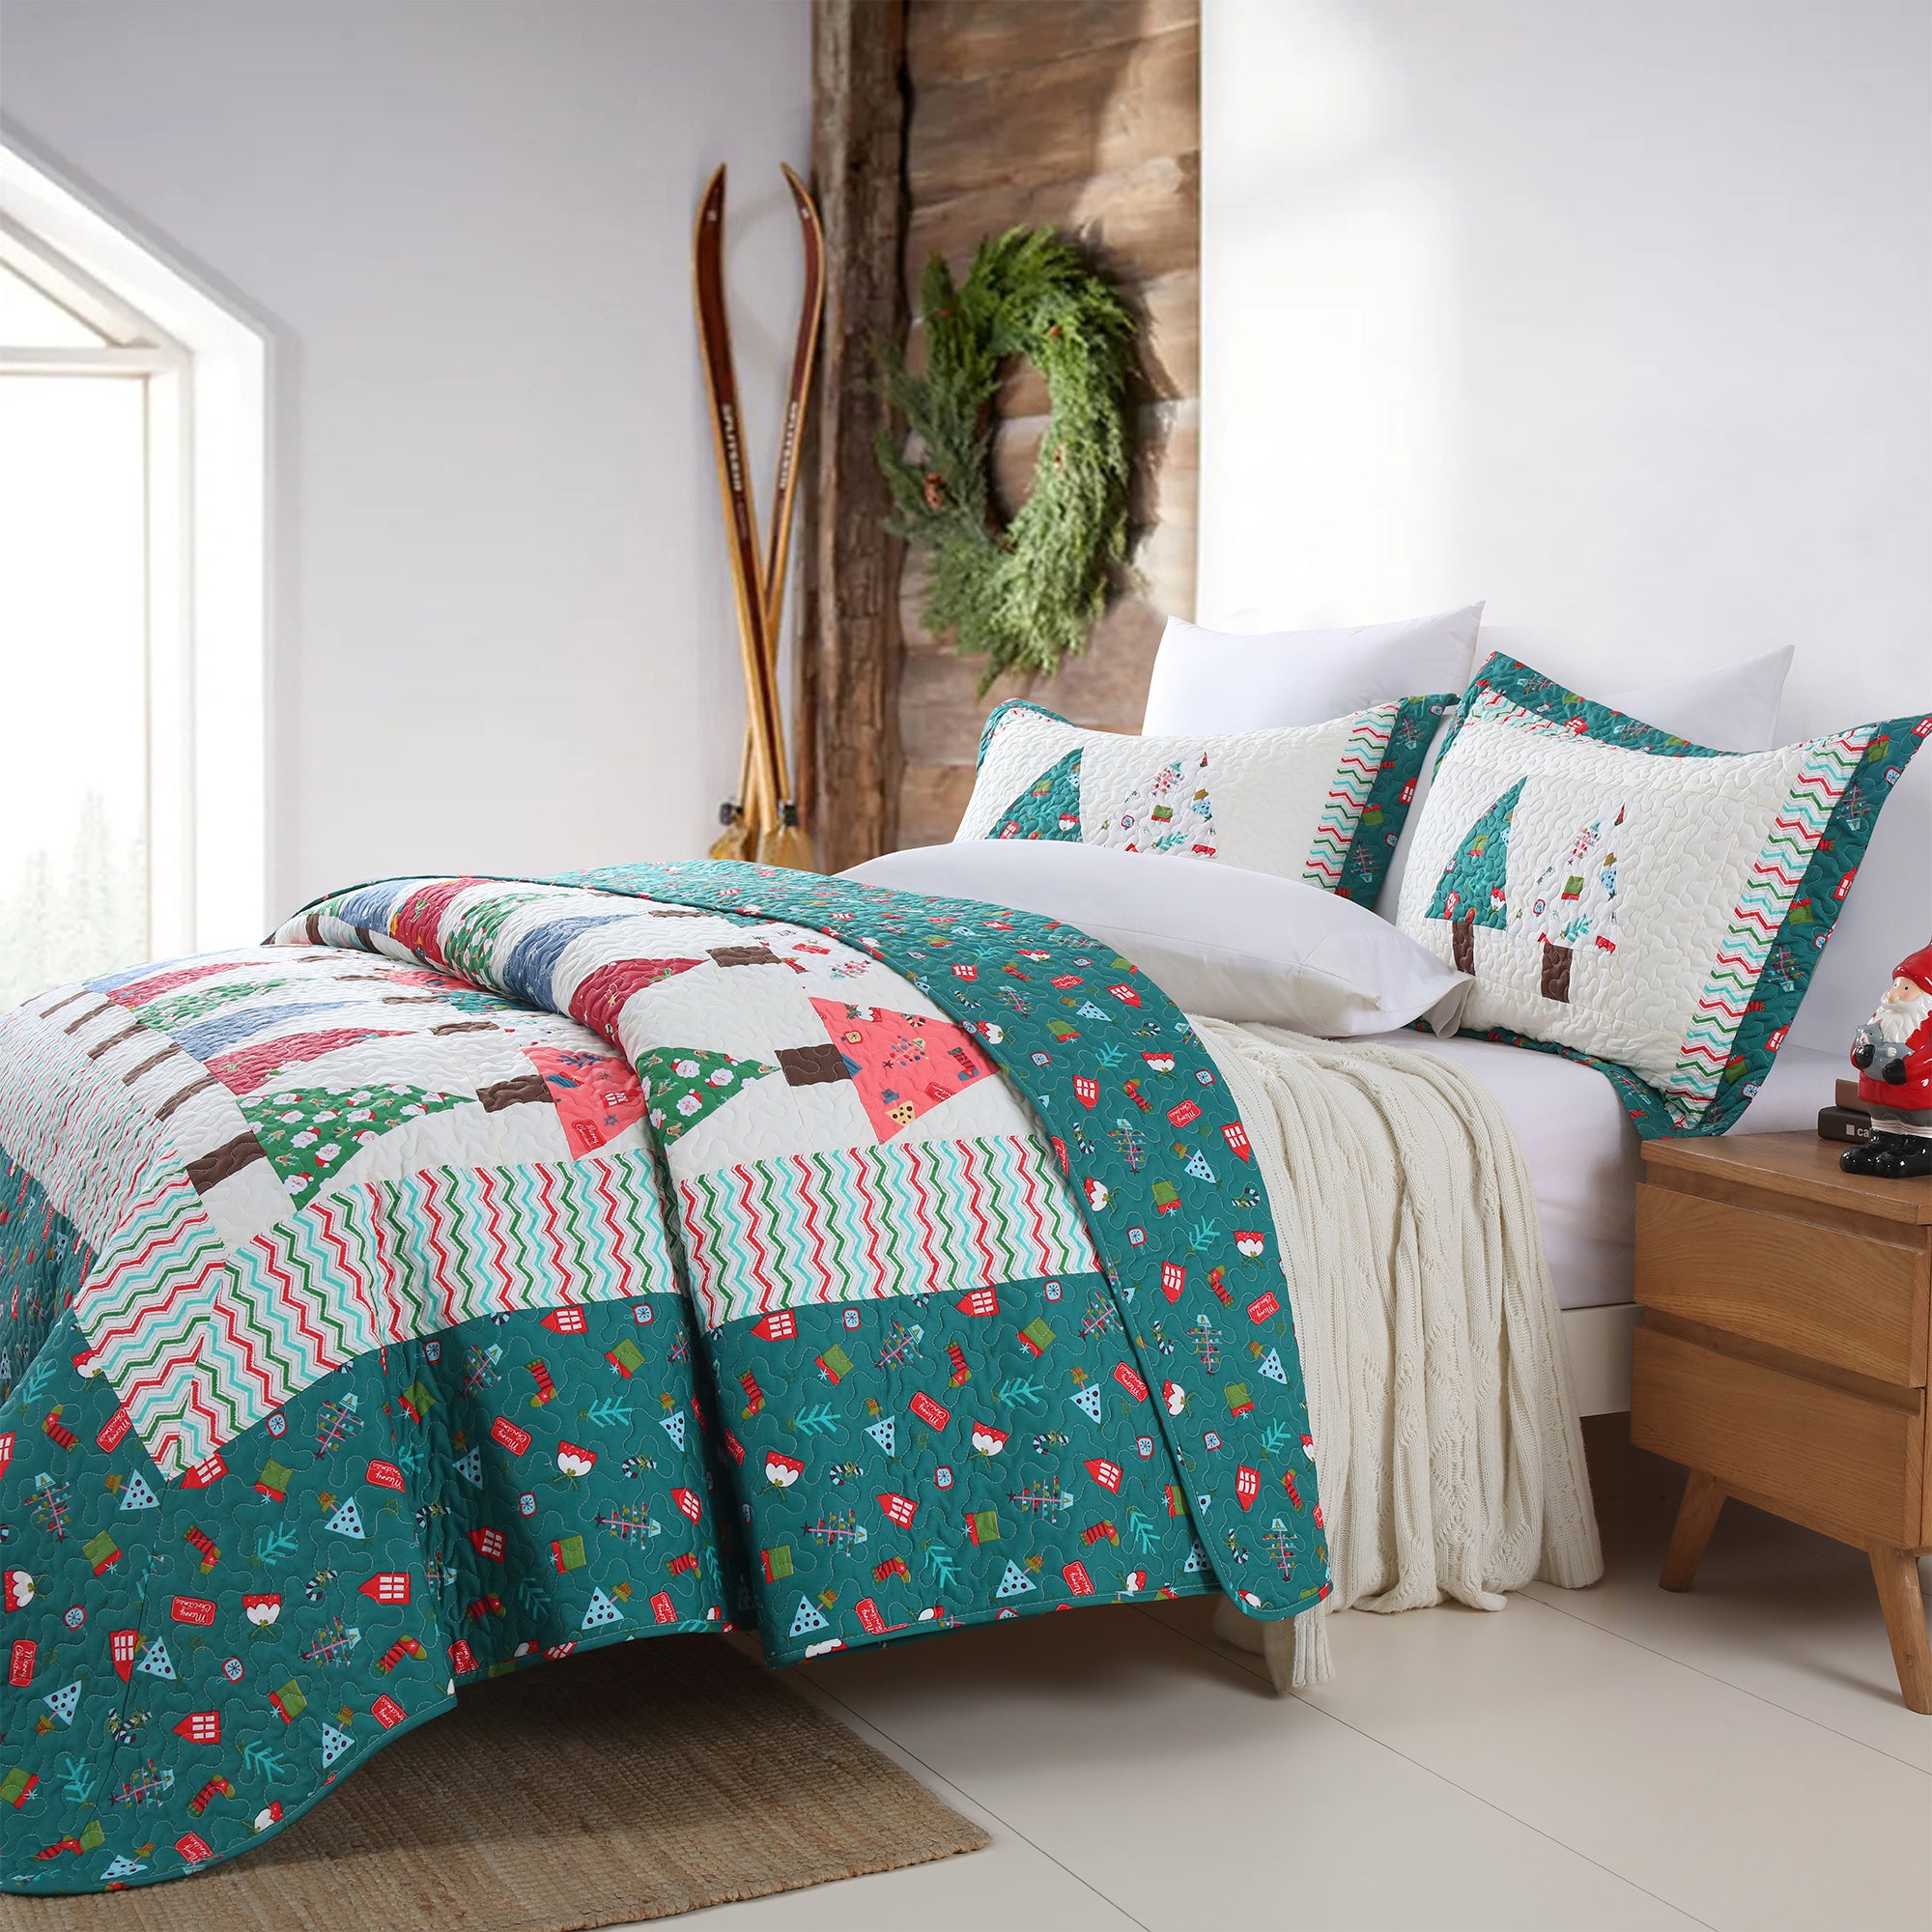 Handcrafted Christmas Patchwork Cotton Quilt Bedspread Set - 3-Piece Vintage Style Holiday Bedding PW101